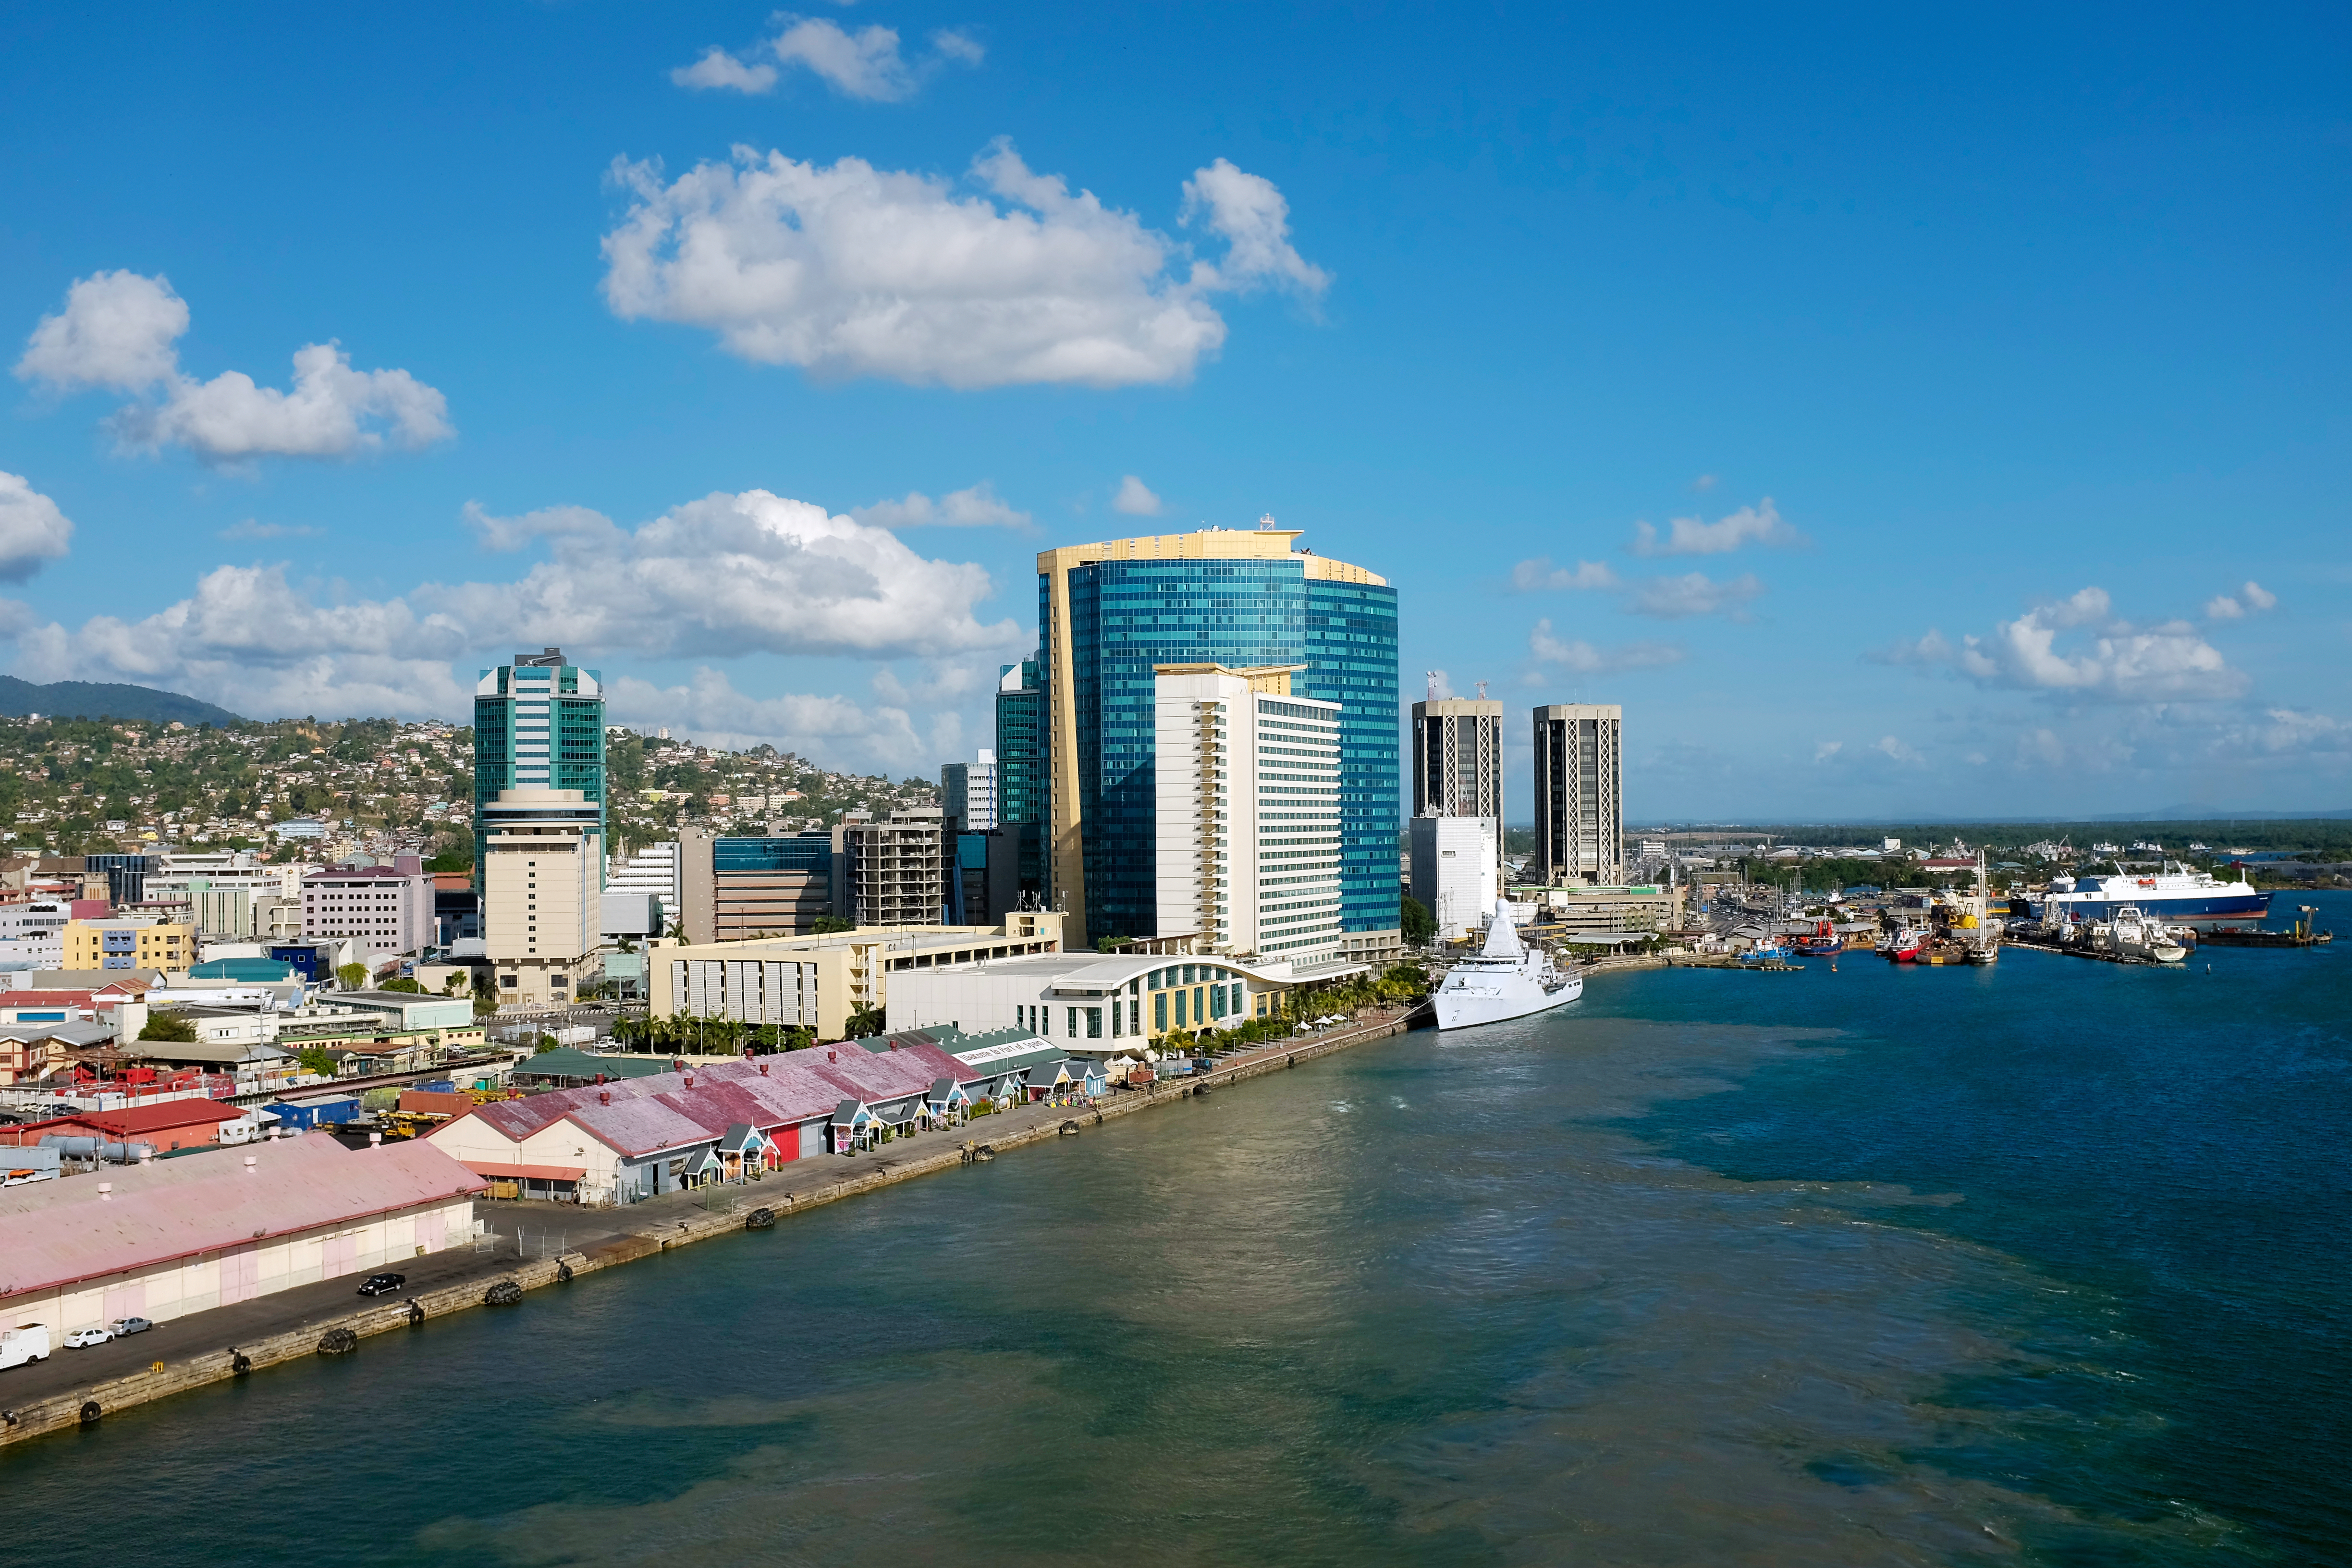 View of Port of Spain Trinidad waterfront